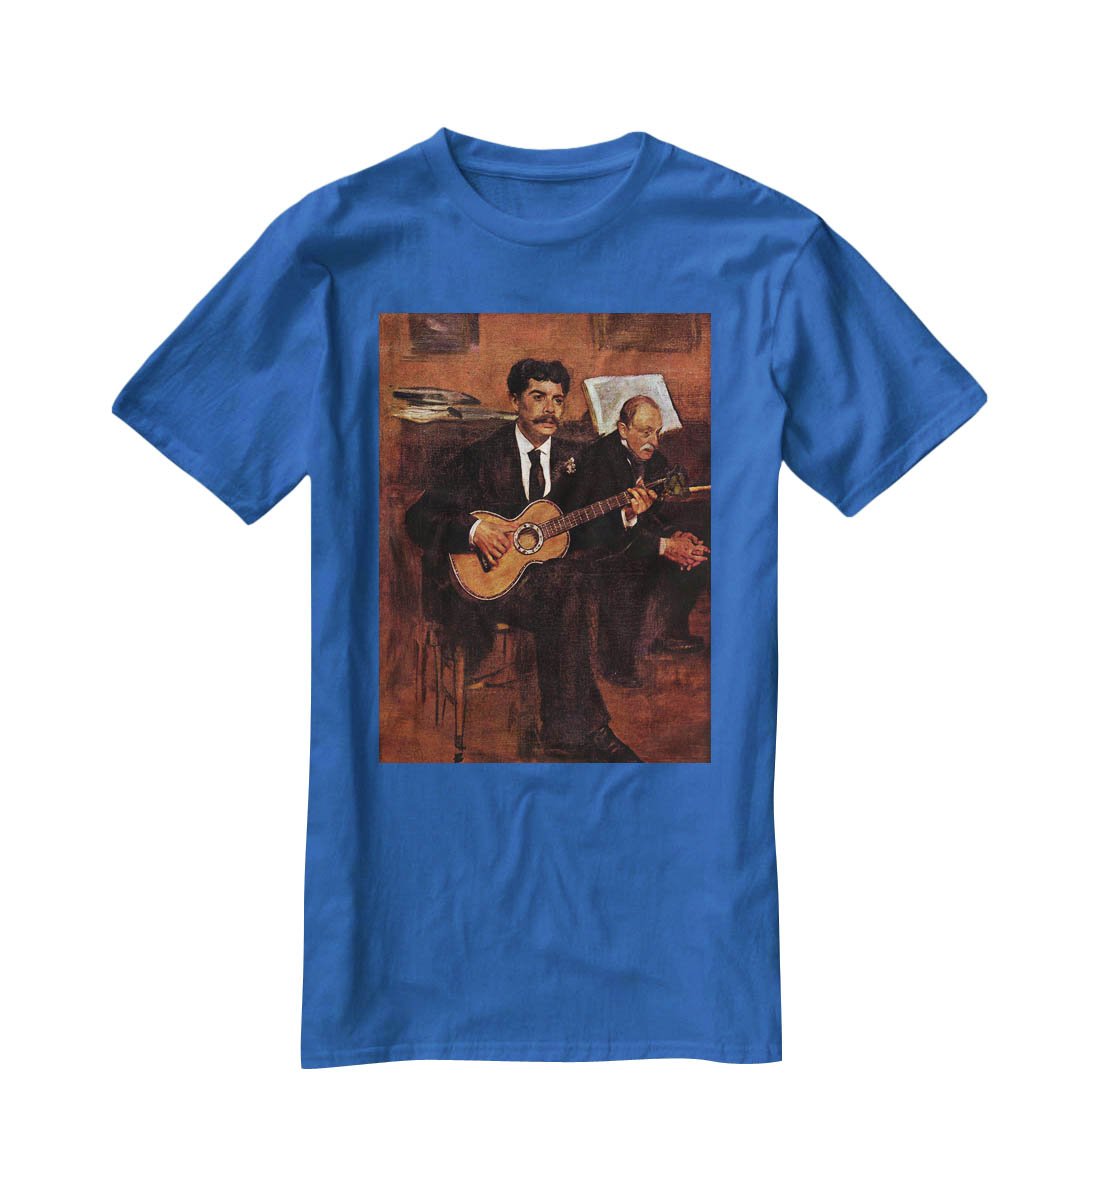 The guitarist Pagans and Monsieur Degas by Manet T-Shirt - Canvas Art Rocks - 2